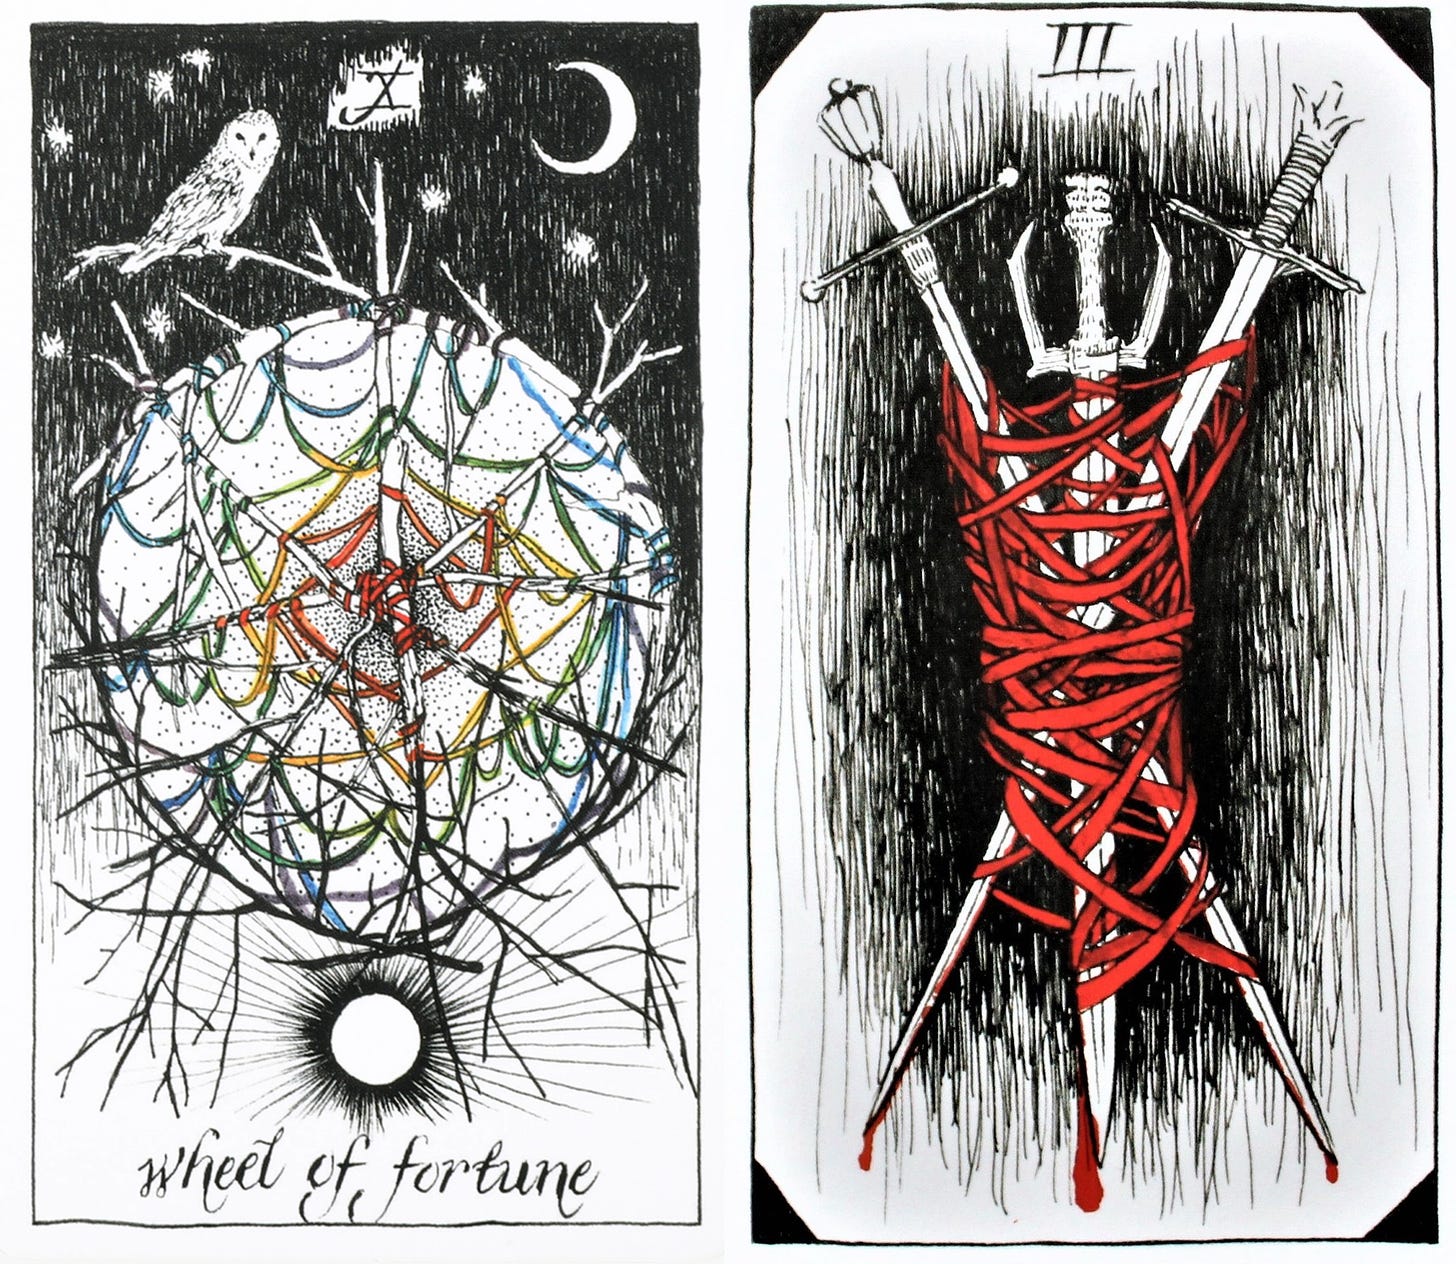 Two tarot cards: The Wheel of Fortune (on the left) and The 3 of Swords (on the right) from The Wild Unknown Tarot deck. The Wheel of Fortune card features a rainbow colored web of woven threads between 4 branches that are tied together to make a dreamcatcher. An owl is perched on top of the web, the moon is at the top of the card, the sun is at the bottom of the card. The 3 of Swords features 3 swords, bound together by red thread.